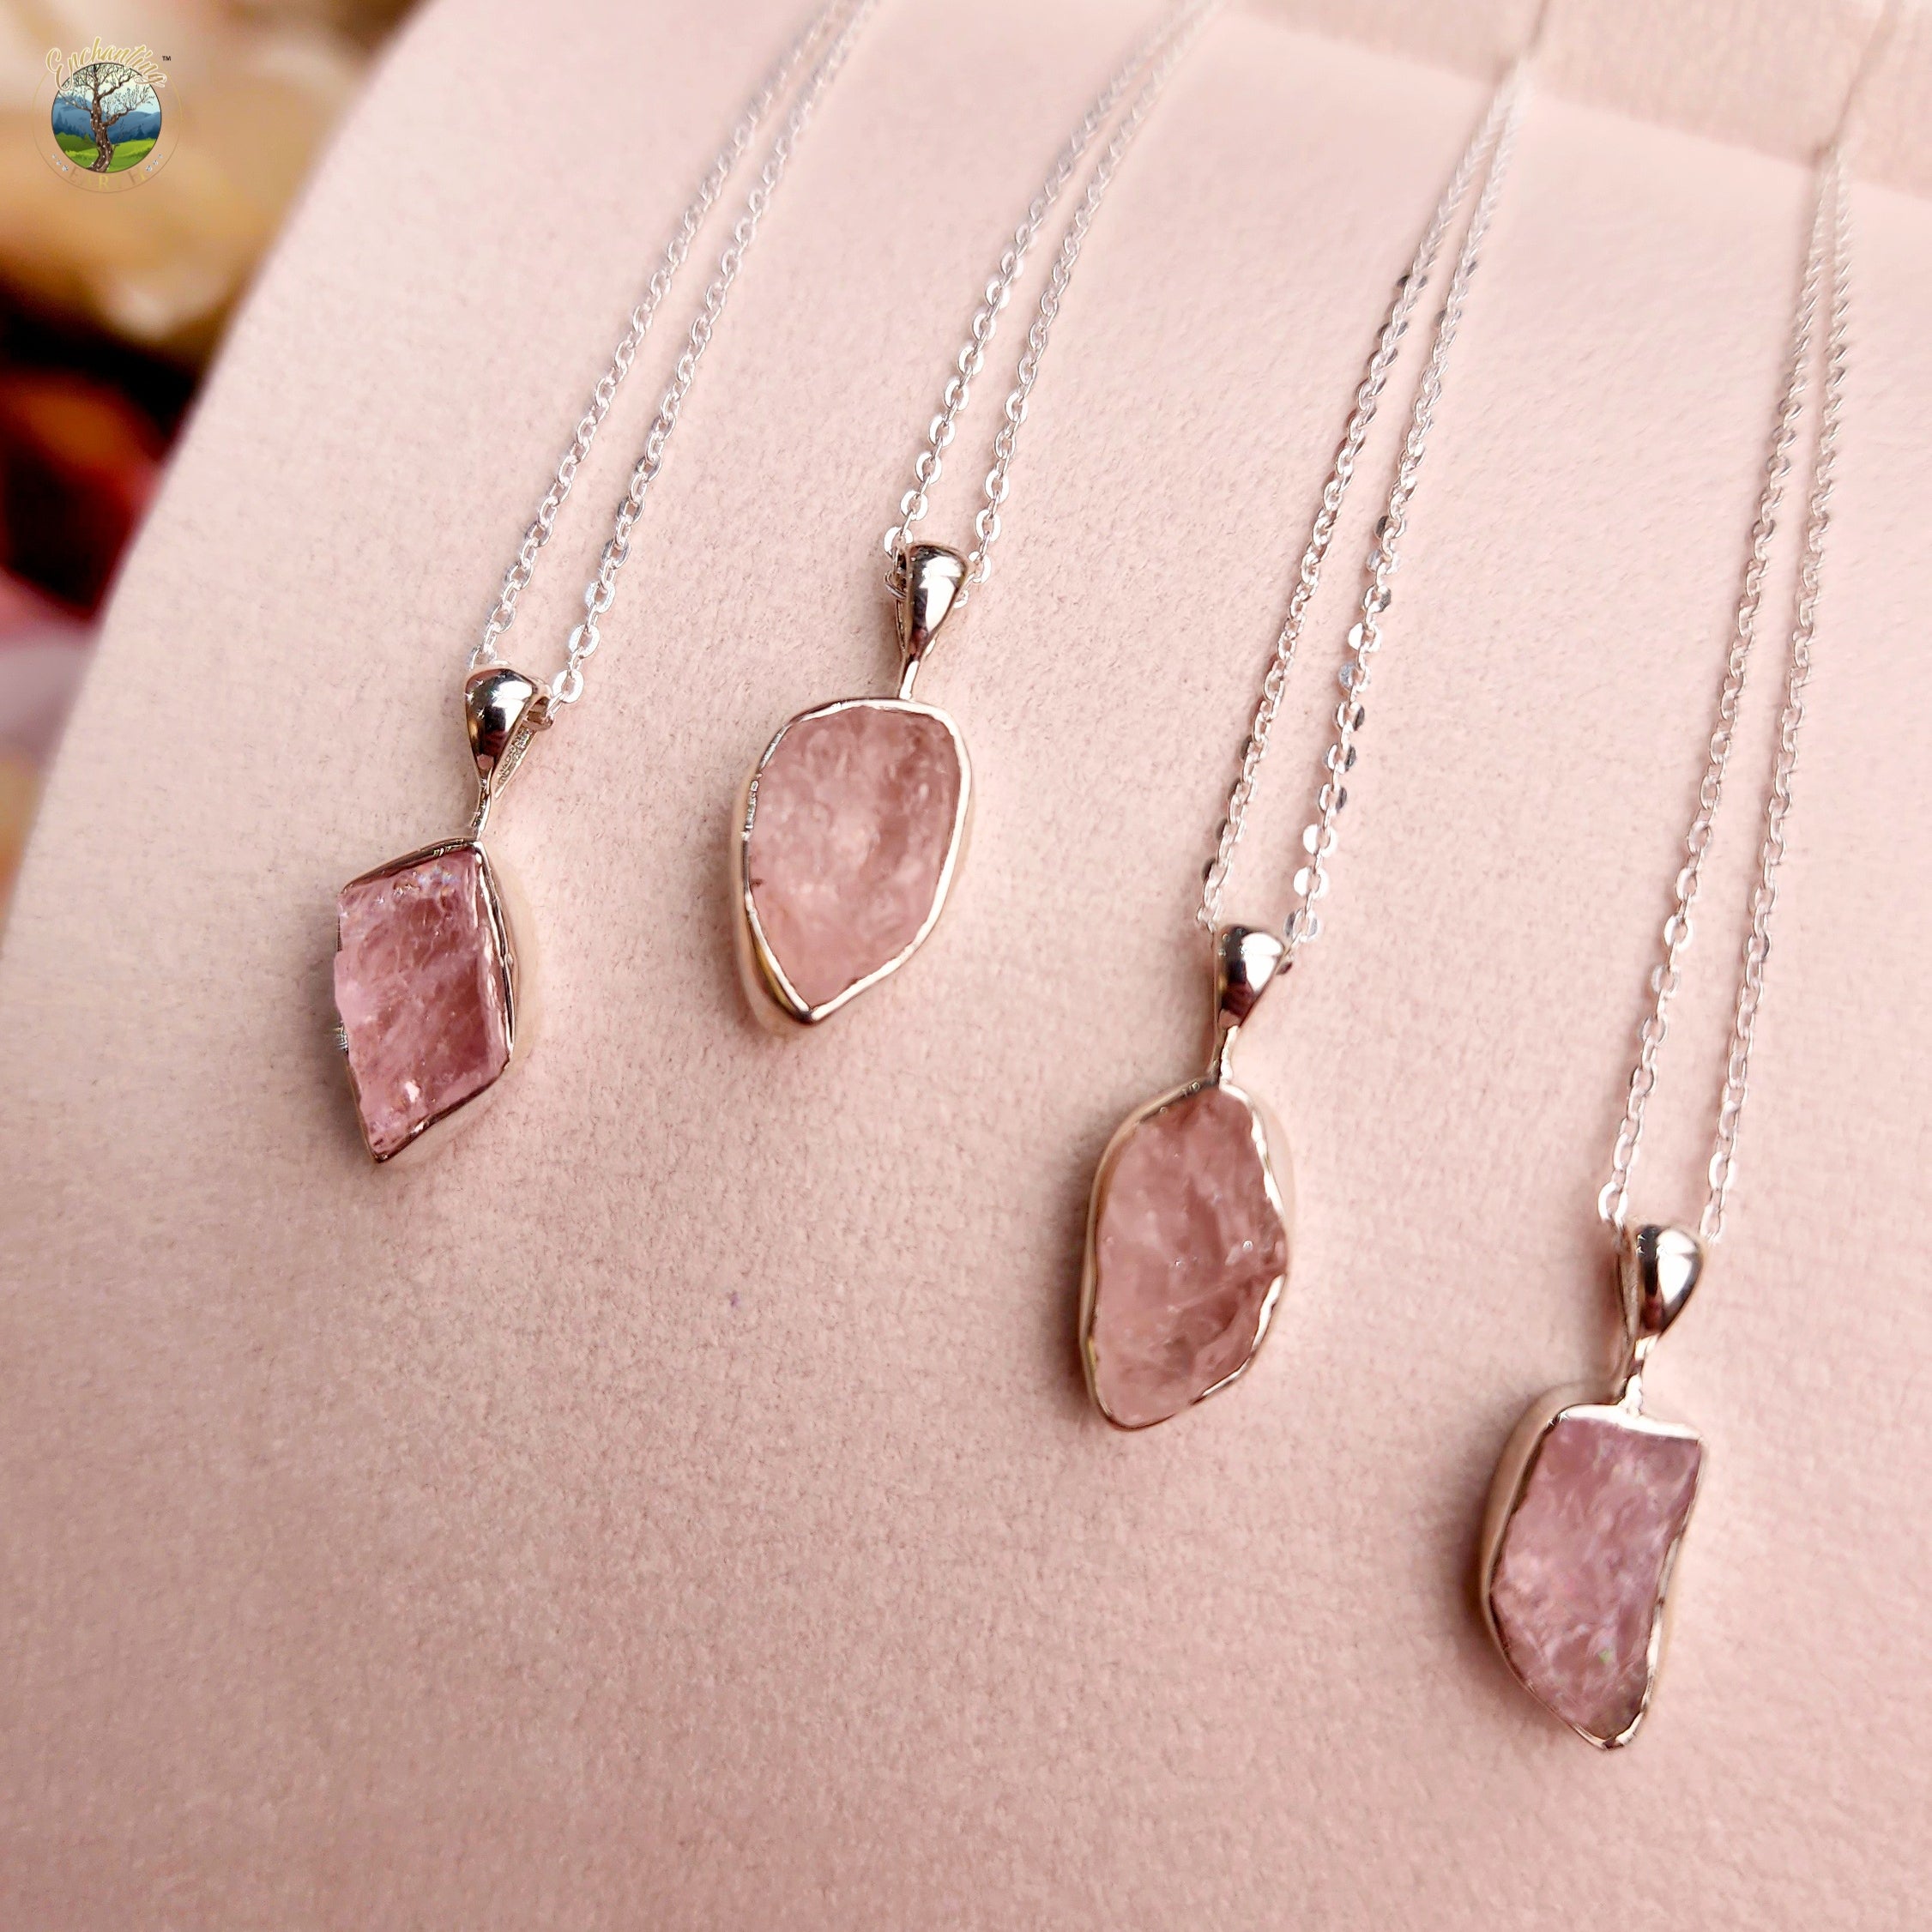 Morganite Raw Necklace .925 Silver for Abundance of Love, Inner Strength and Joy